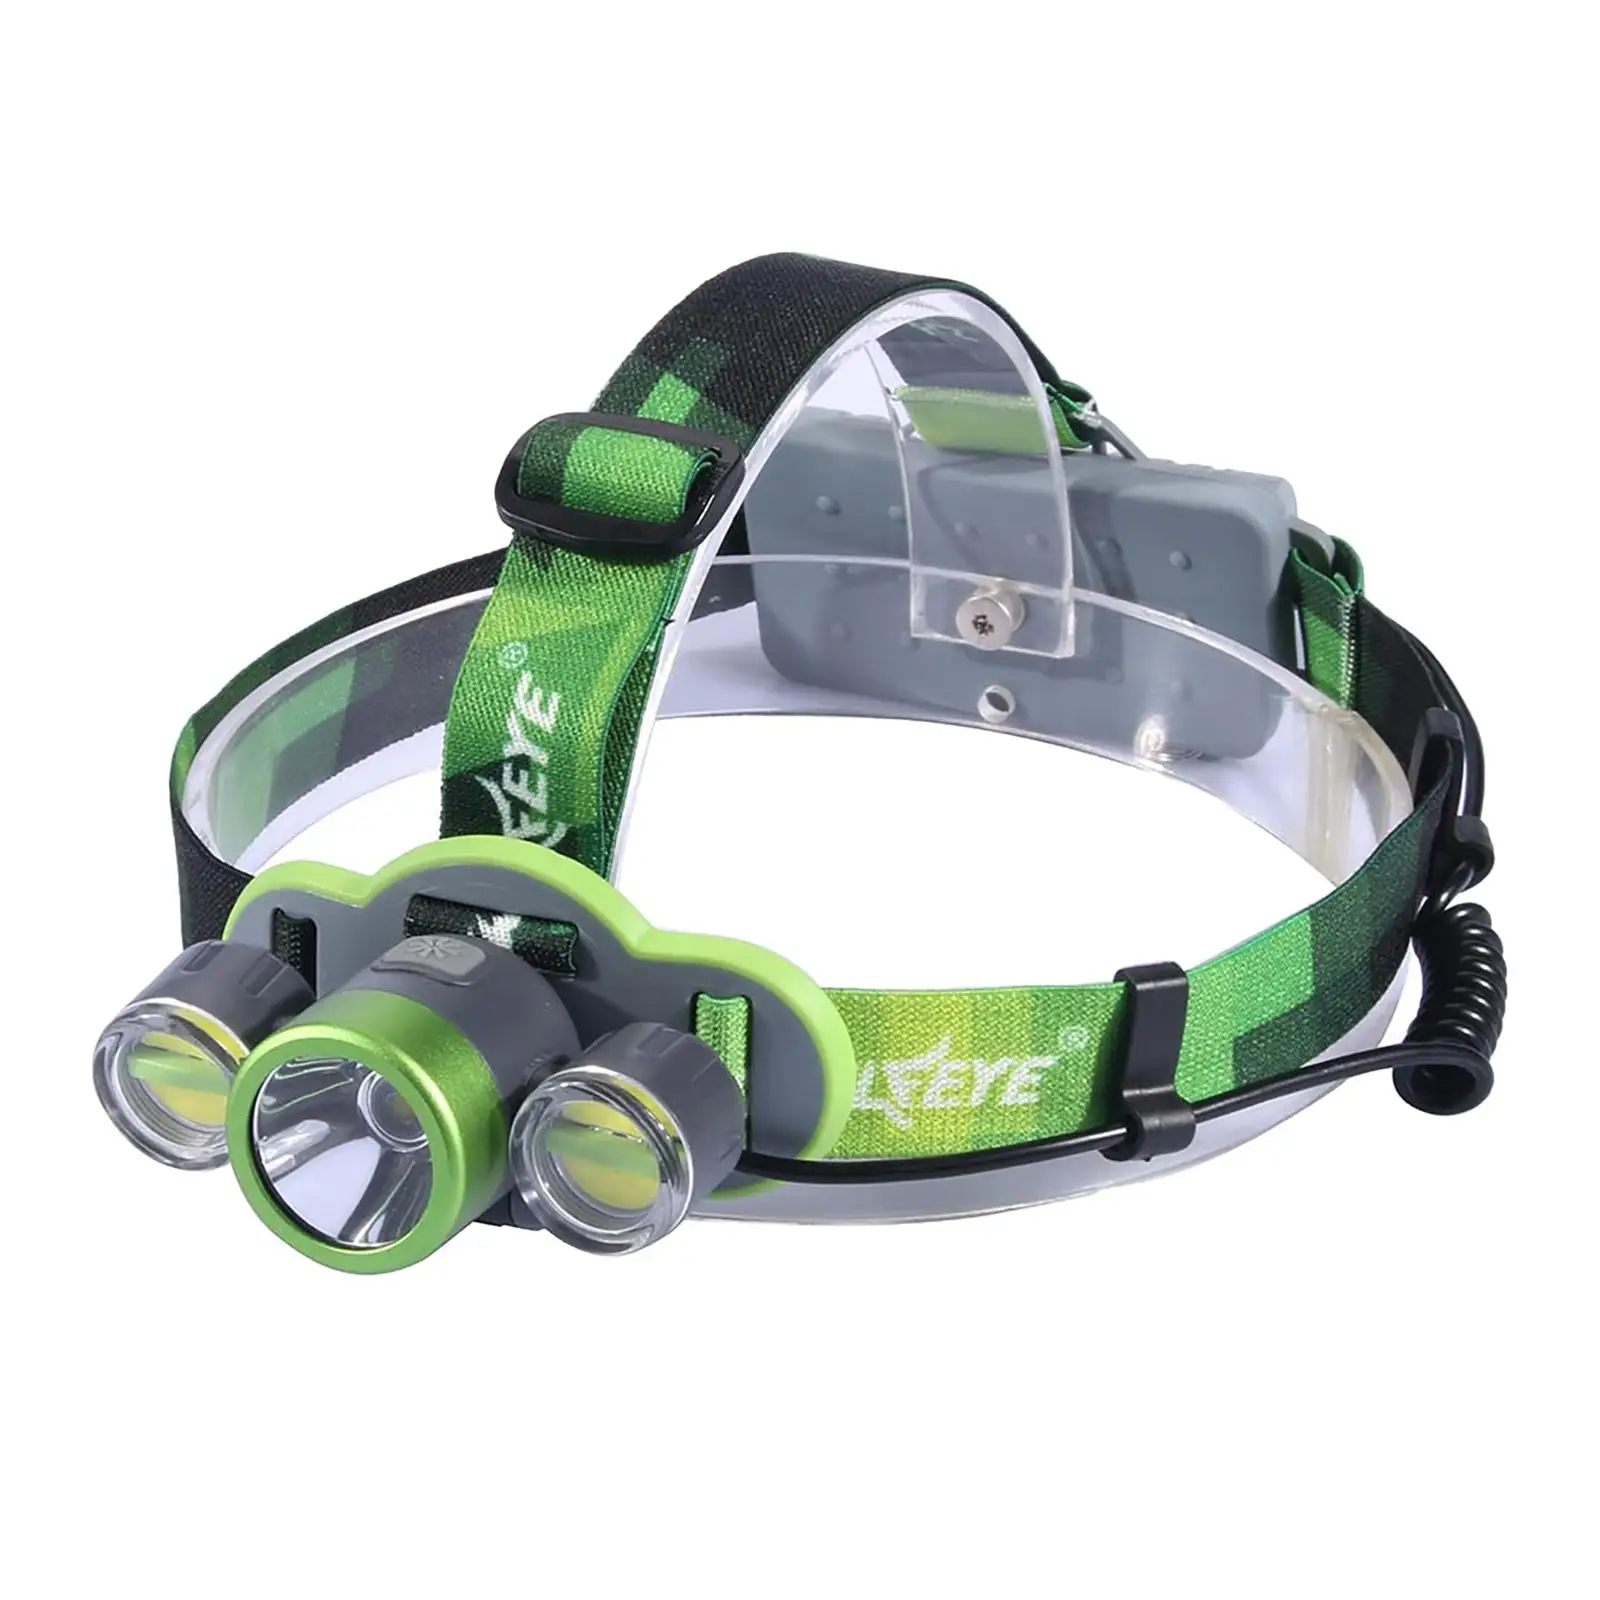 COB LED Headlamp Head Lamp Rechargeable Waterproof Headtorch 5 Modes flashlights for Riding Working Camping Hunting Outdoor